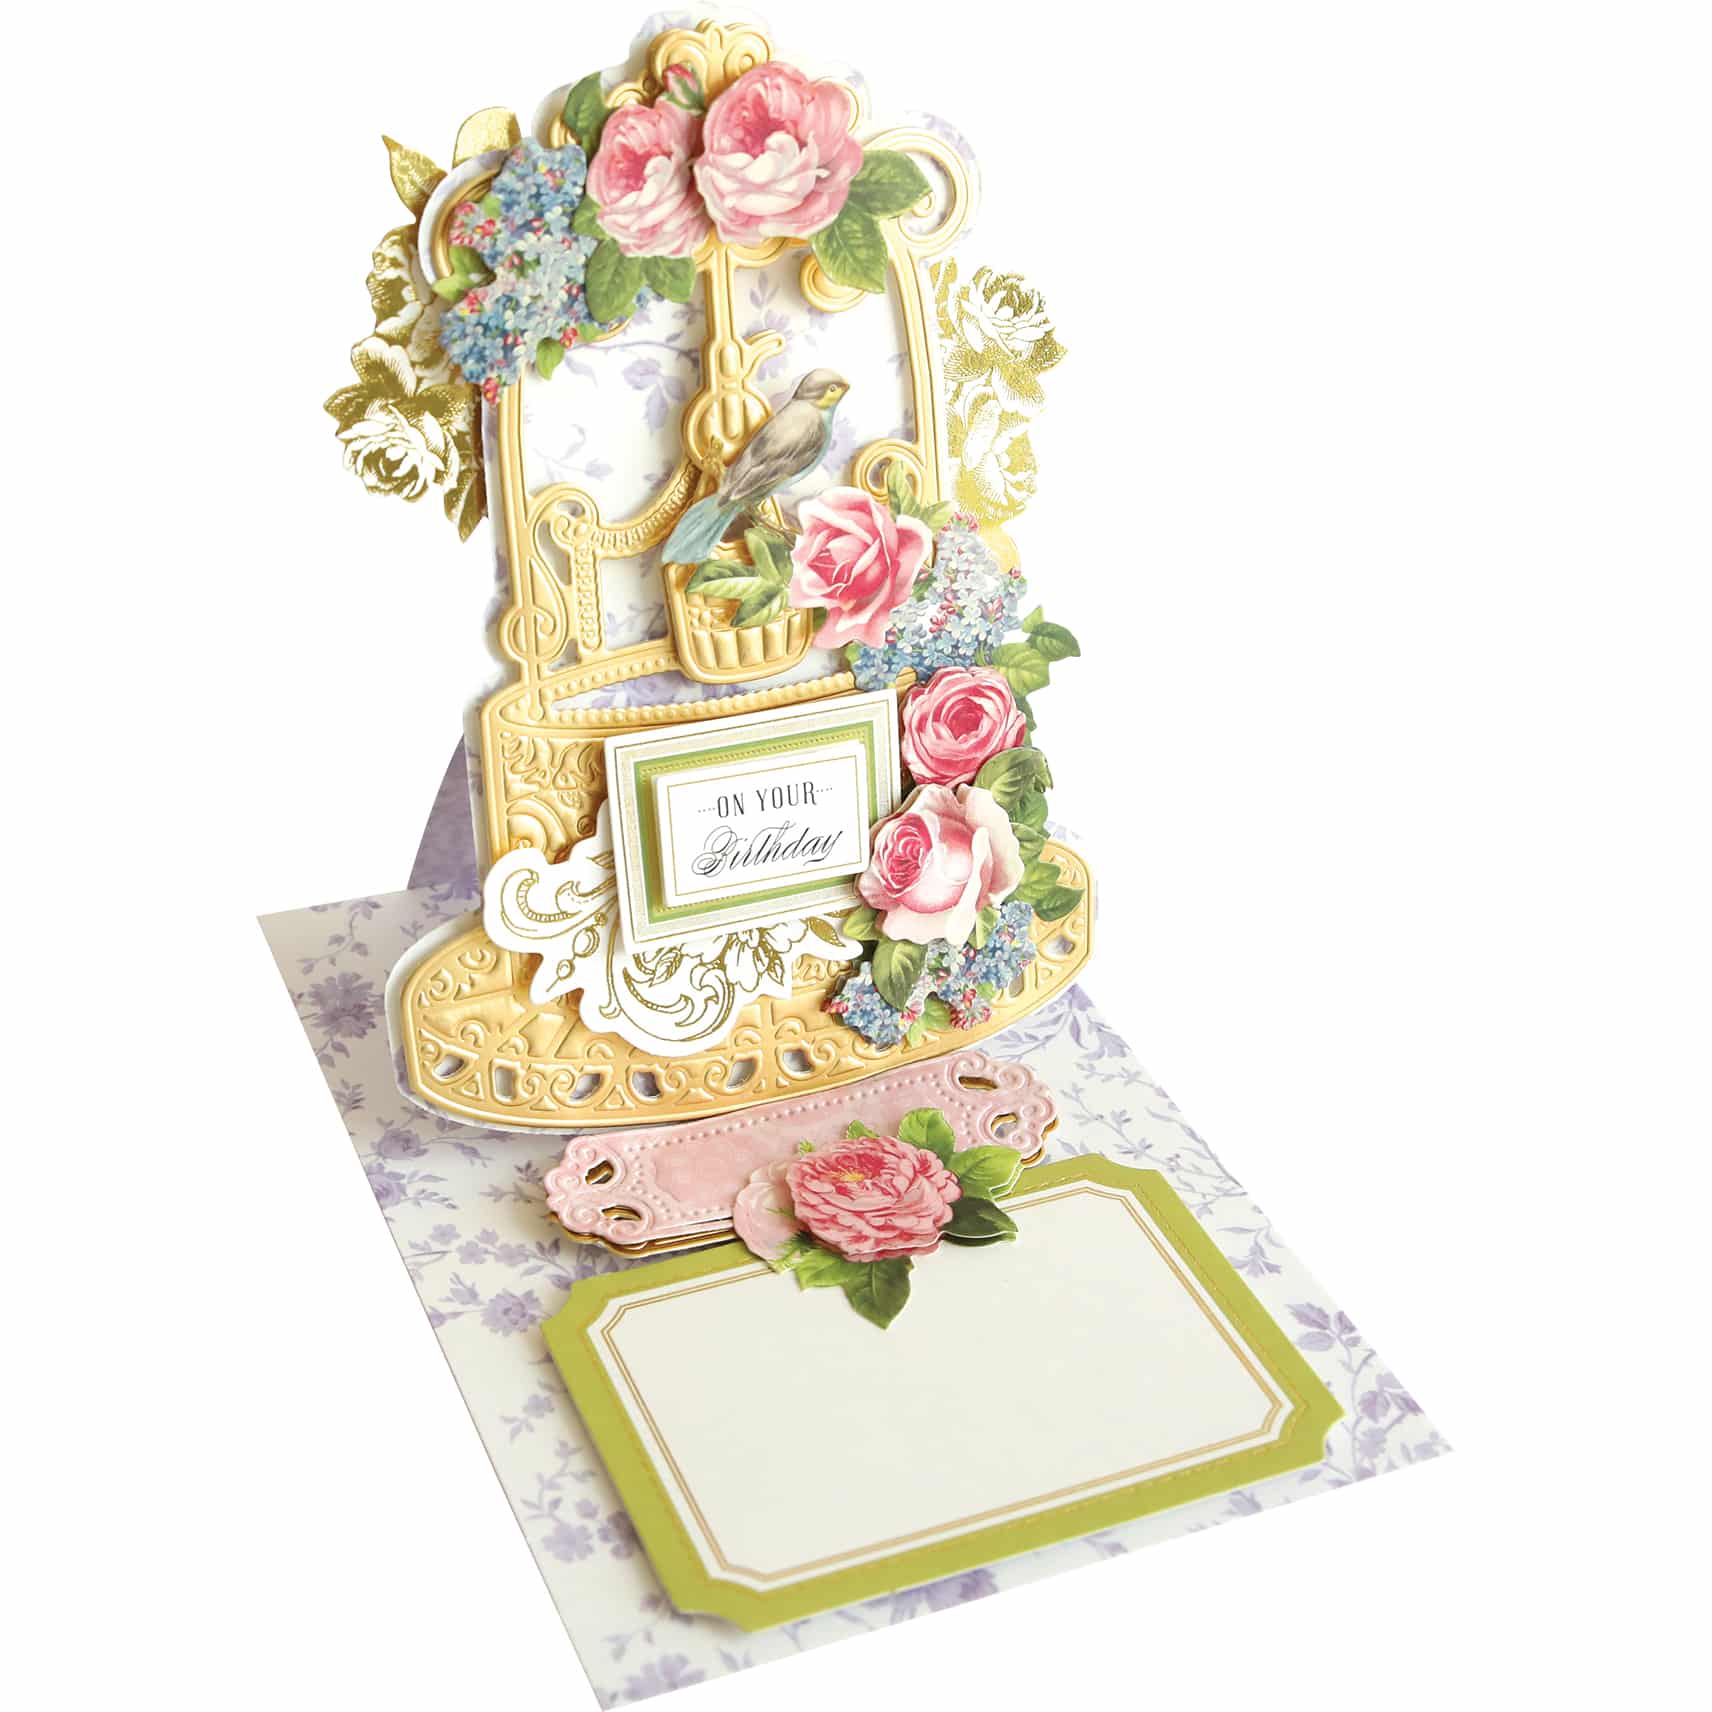 A Wishing Well Easel Finishing School Kit with a bird and flowers on it.